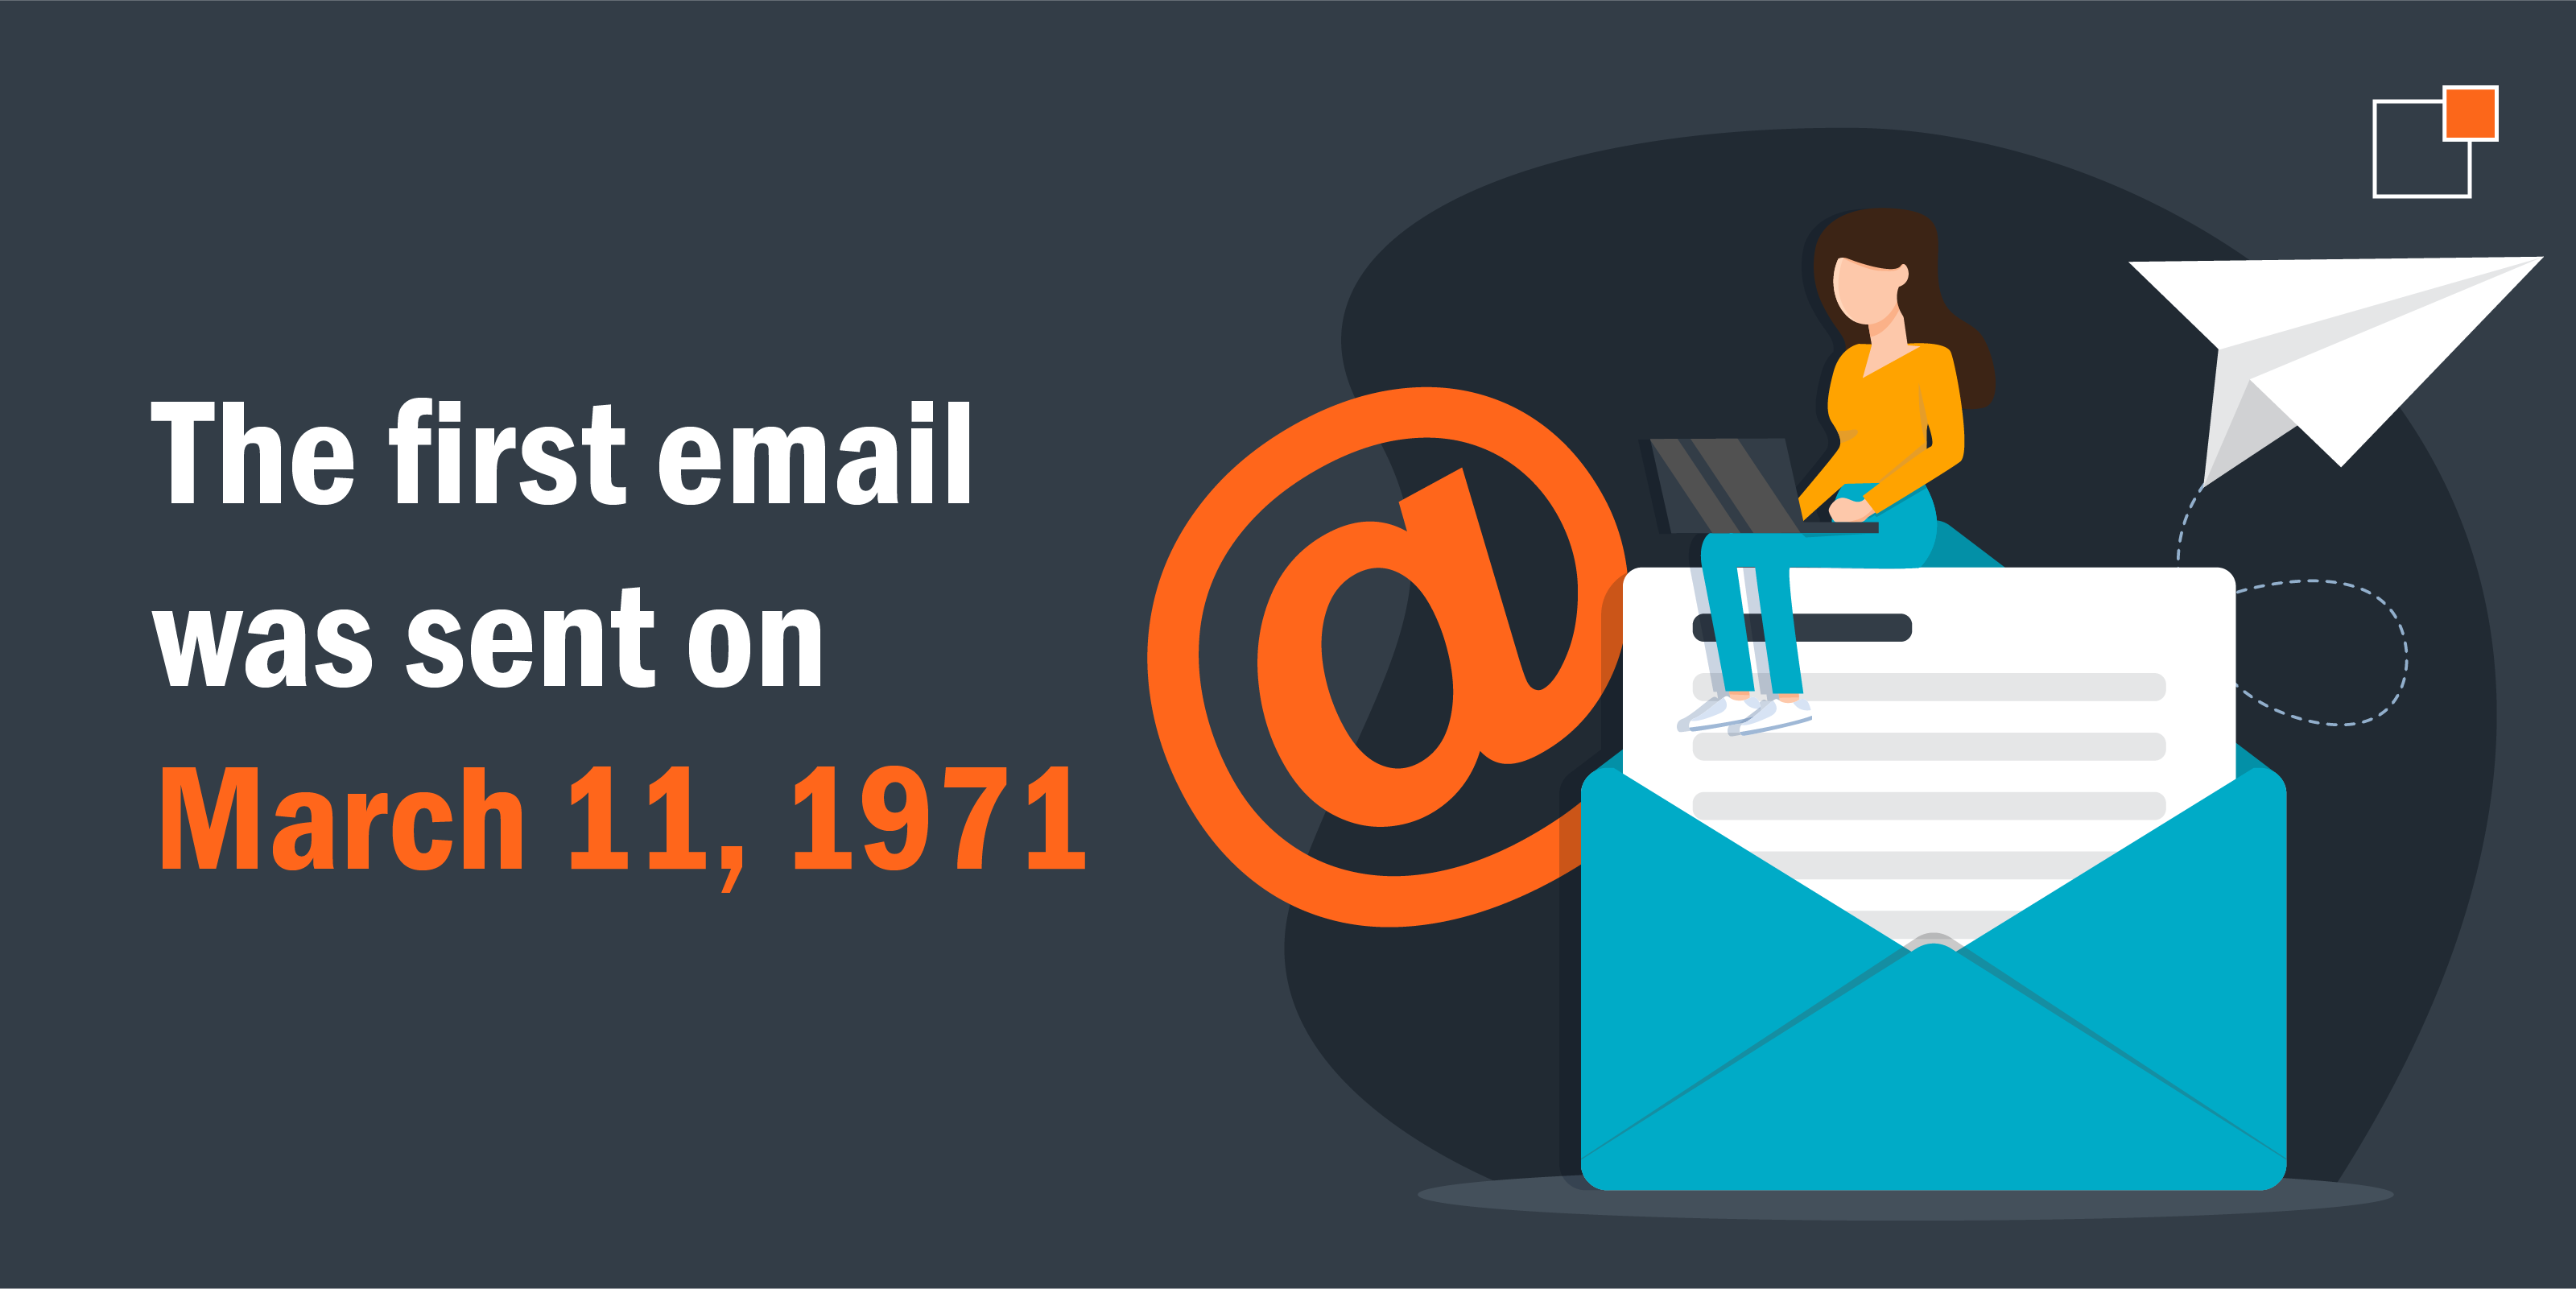 The first email was sent on March 11, 1971